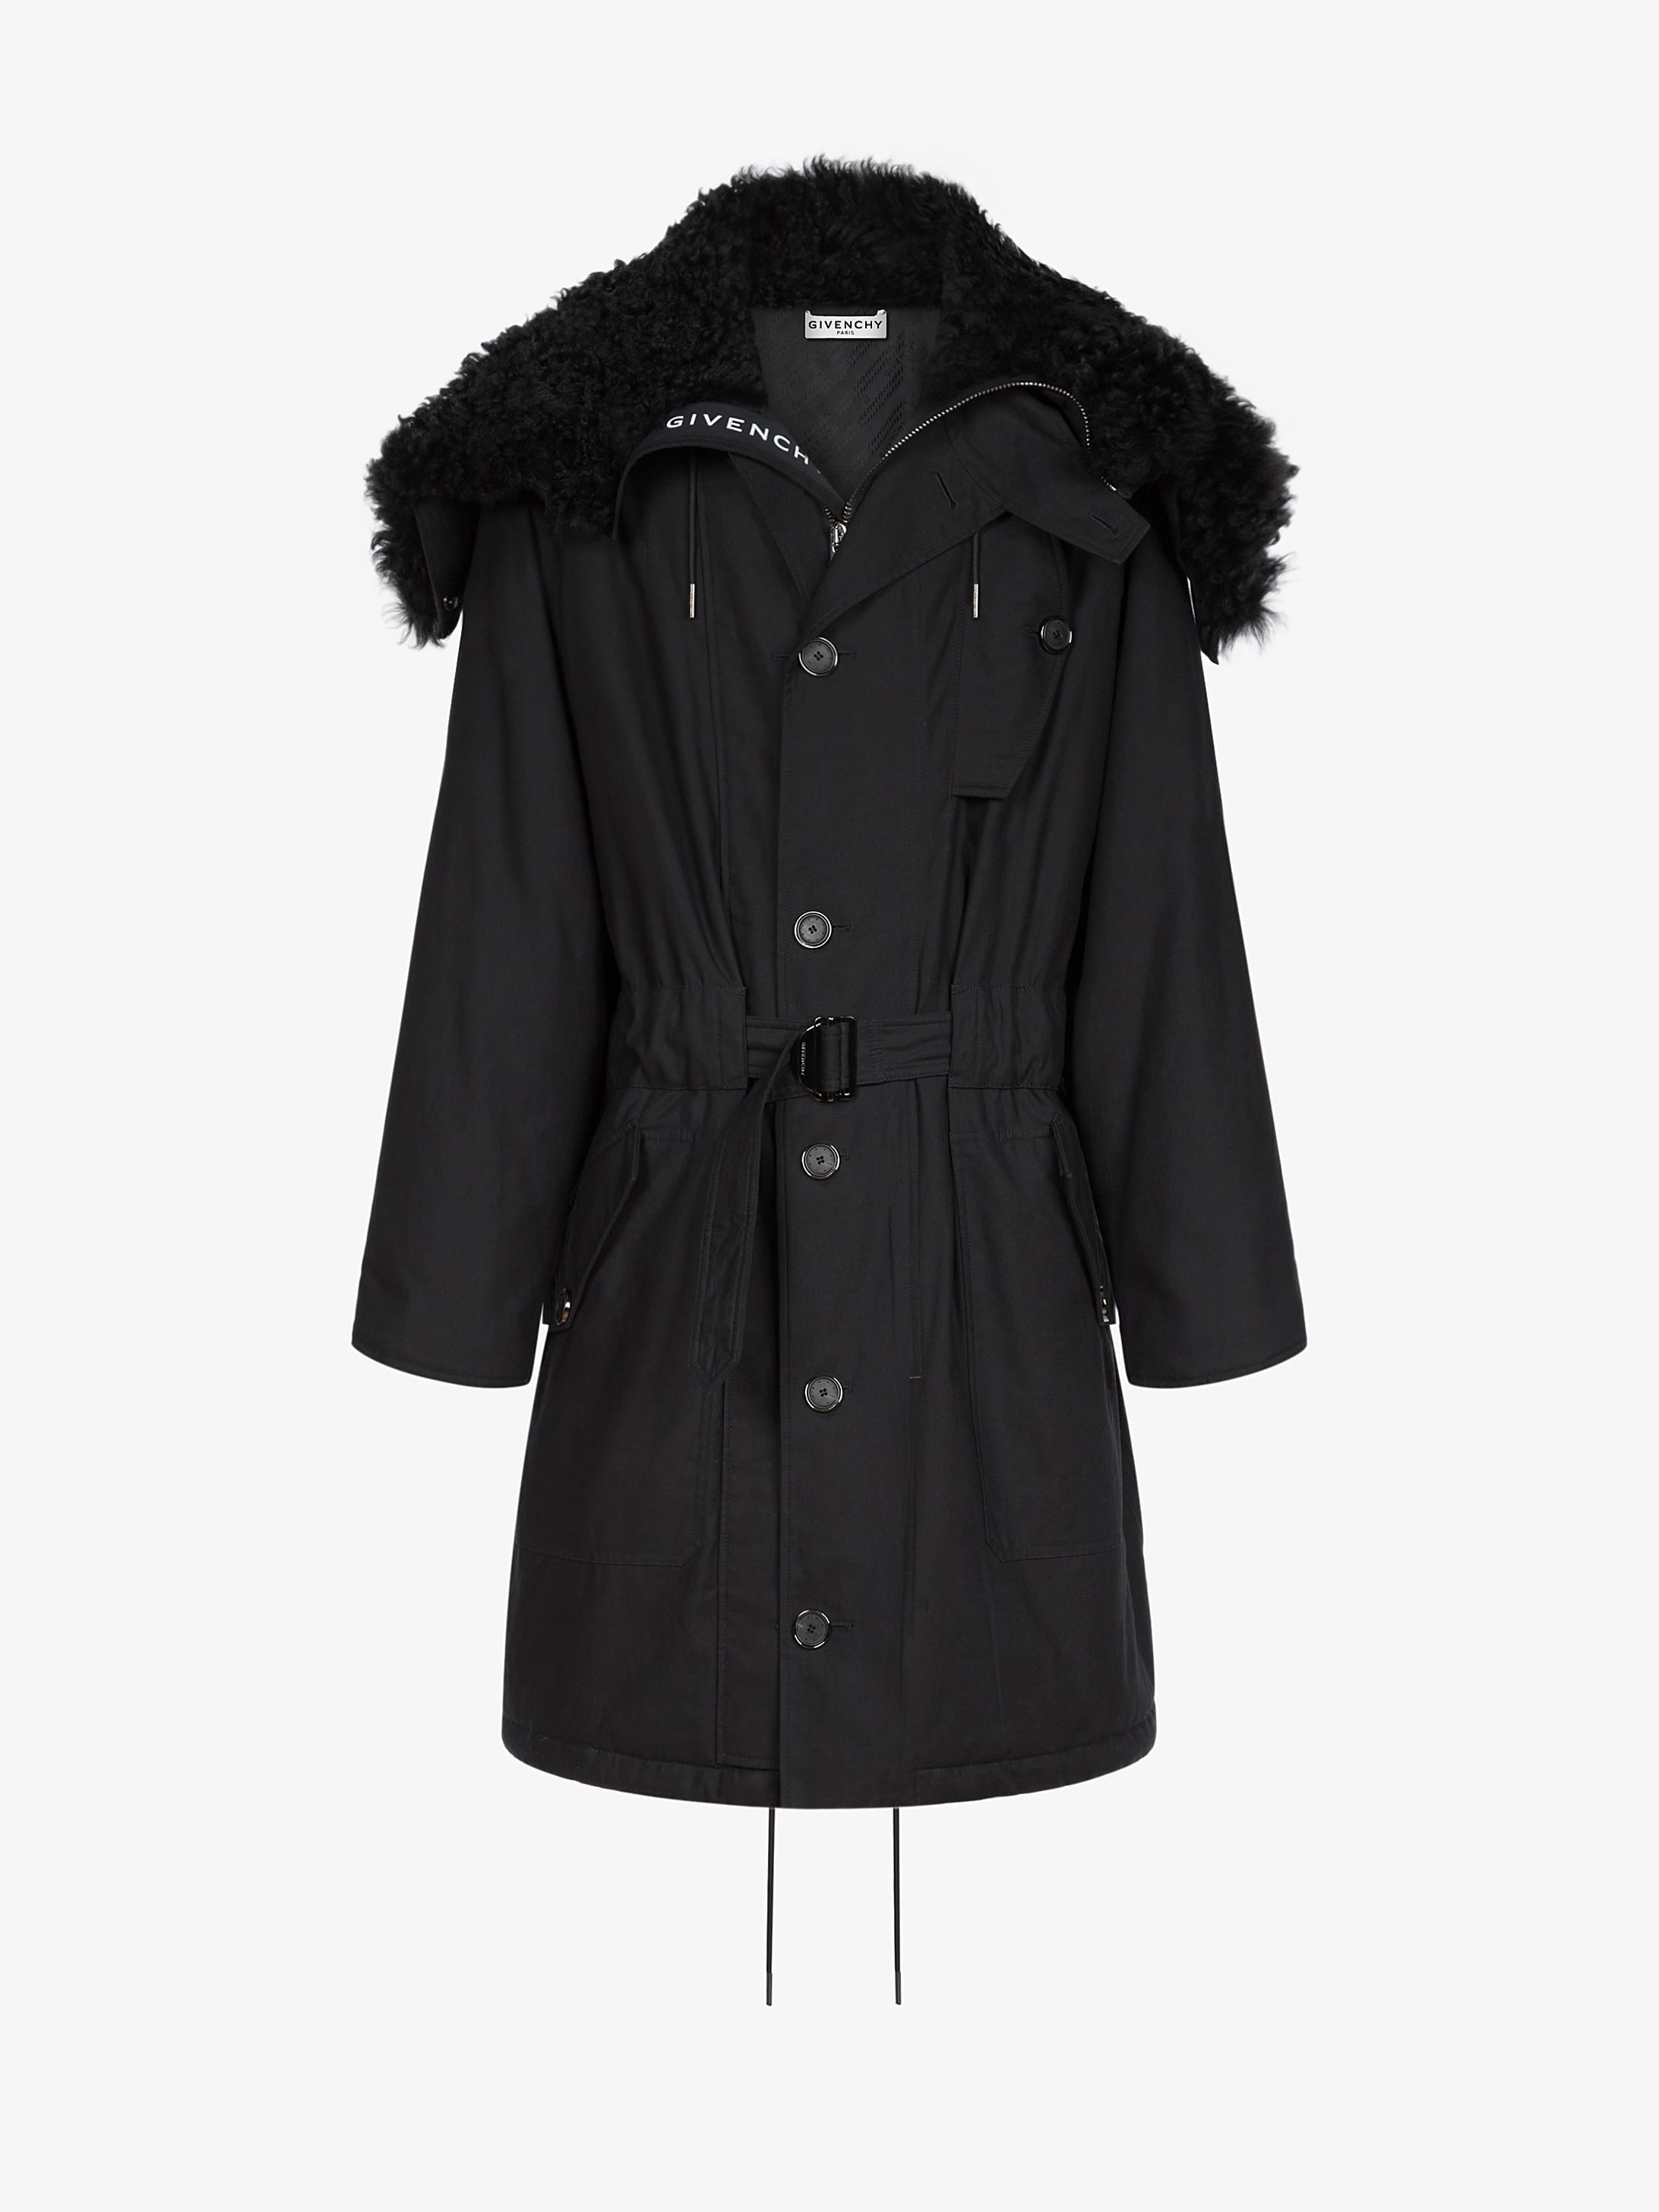 Hooded parka in sheep lining | GIVENCHY 